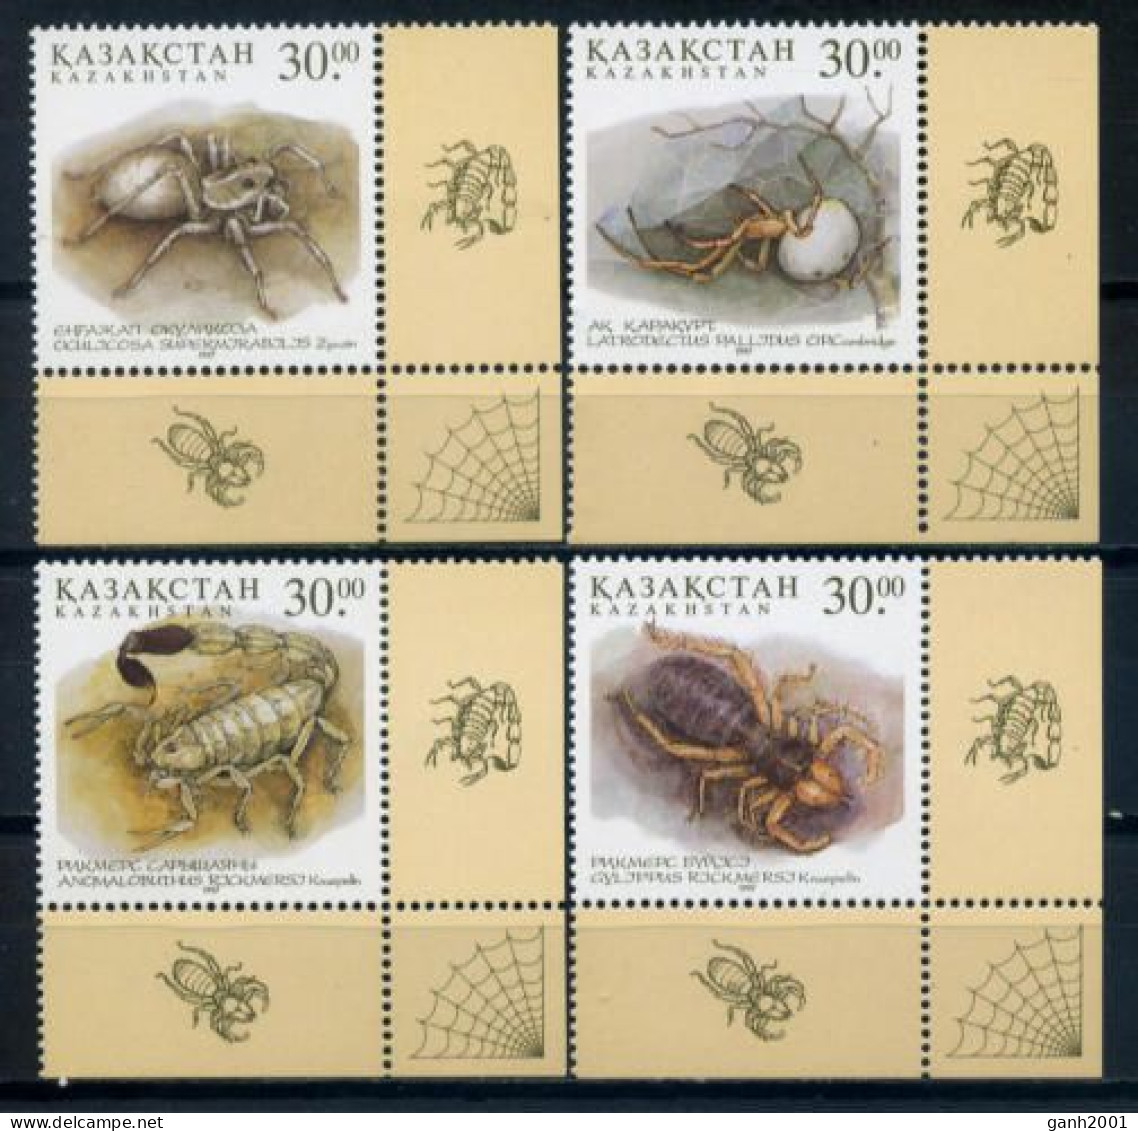 Kazakhstan 1997 / Insects Spiders MNH Insectos Ara&ntilde;as Spinnen / Hi99  2-13 - Spinnen